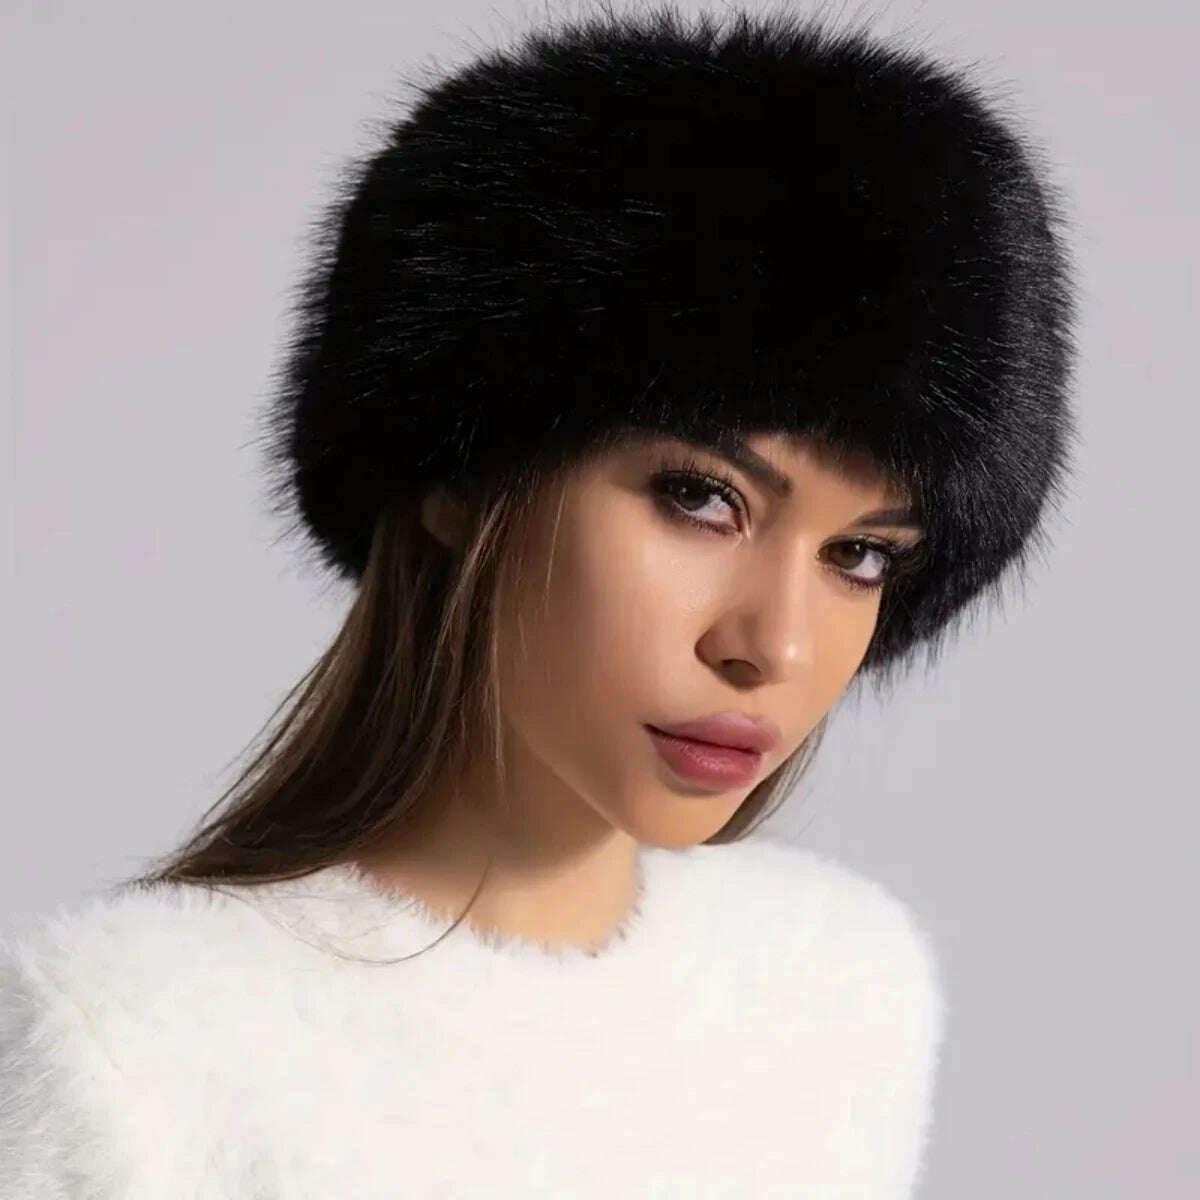 KIMLUD, Winter lmitation Fur Thickened Hat Without Top Hat, BreathableComfortable Outdoor Travel Brimless Hat, KIMLUD Women's Clothes